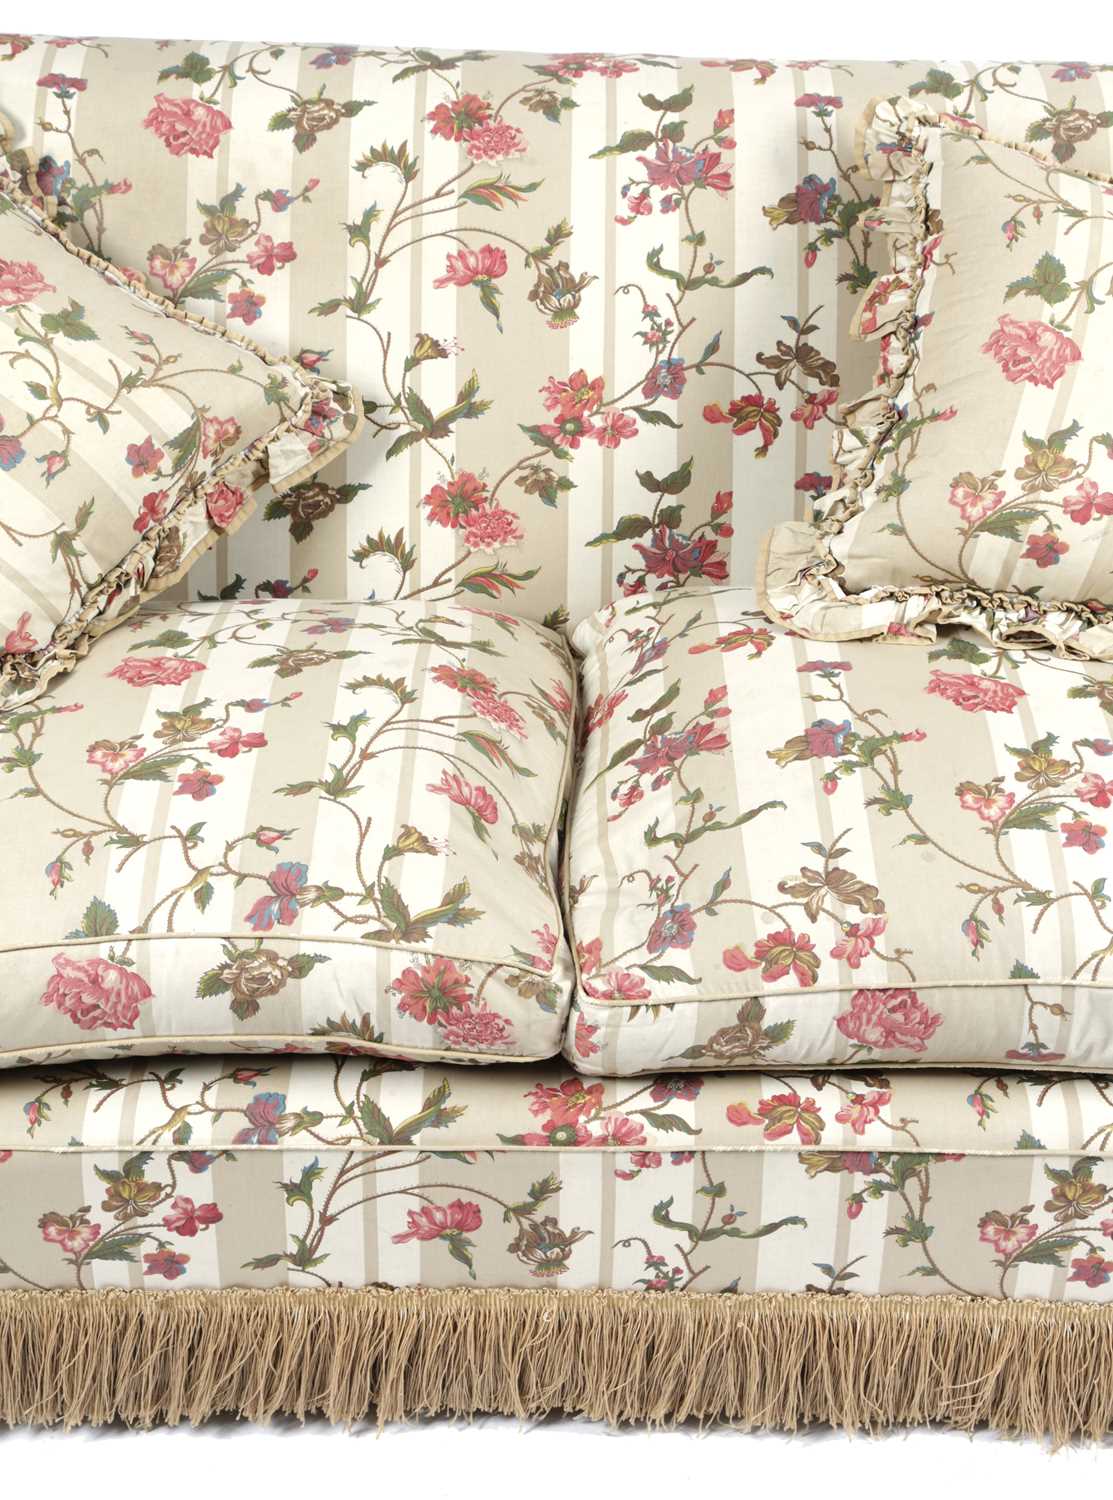 A MODERN TWO SEATER SOFA BY PORTMAN, 20TH CENTURY with chintz floral upholstery, on castors 82.5cm - Image 2 of 3